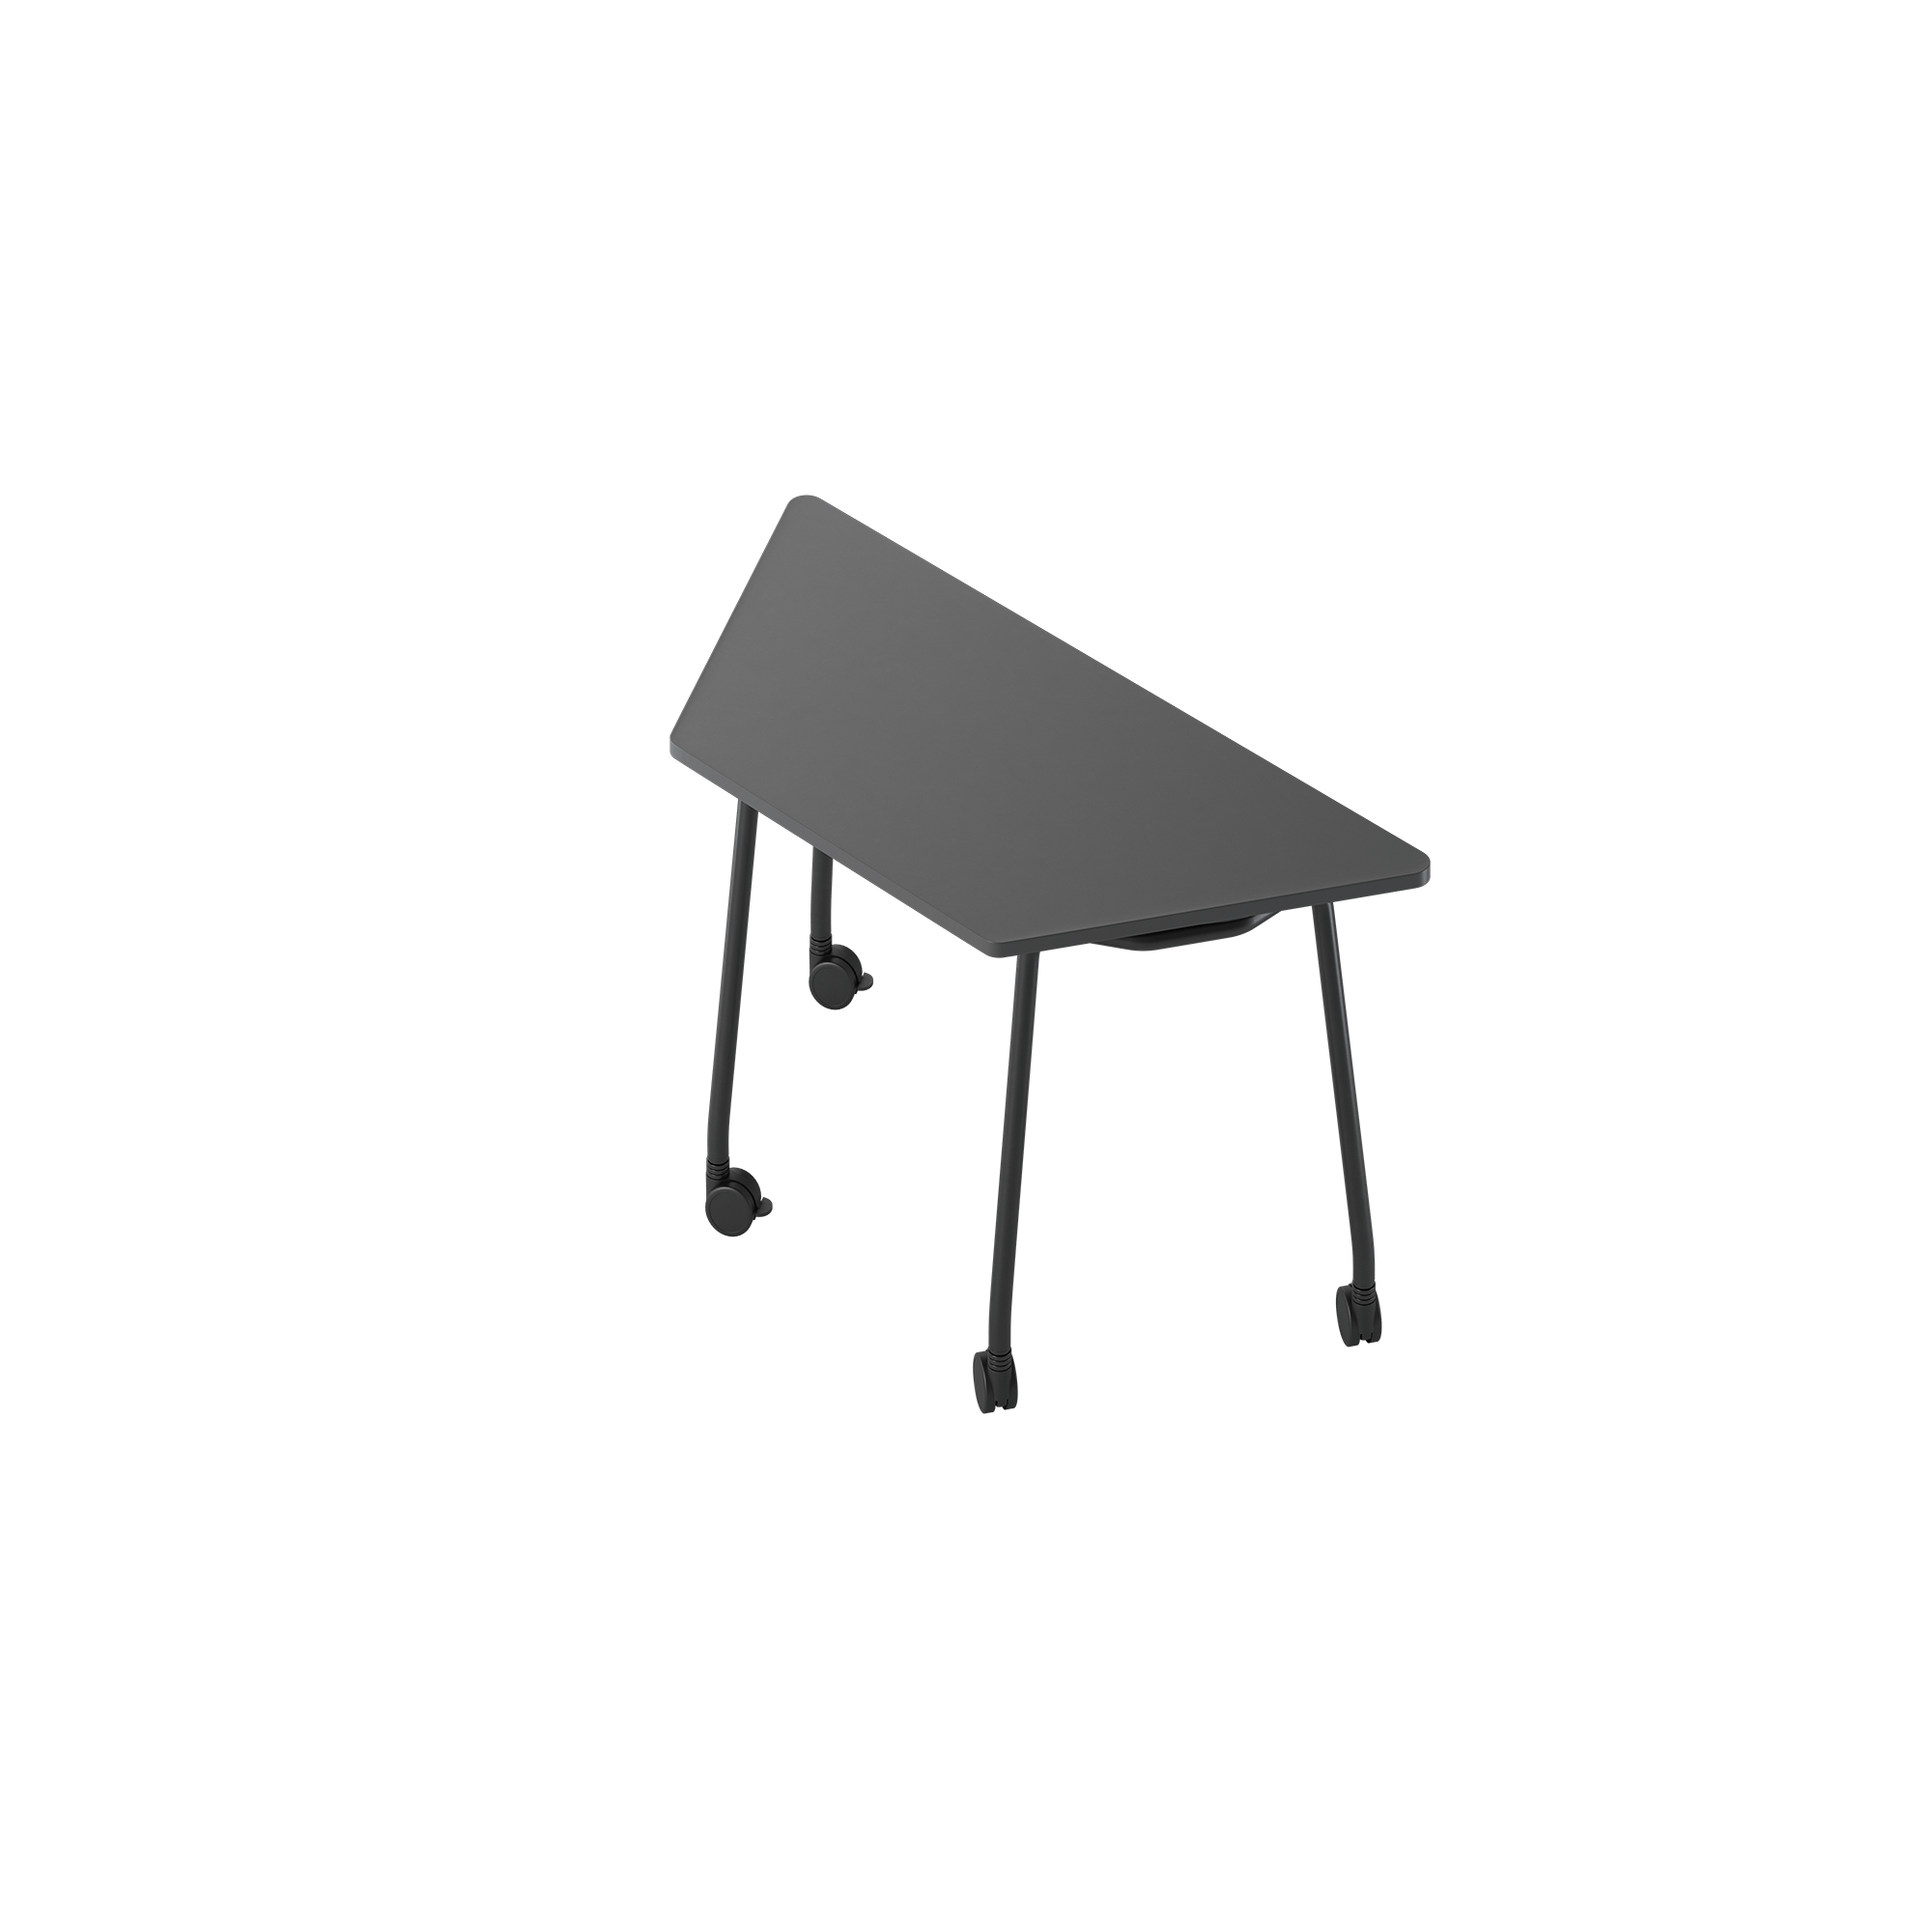 A black triangle table with legs